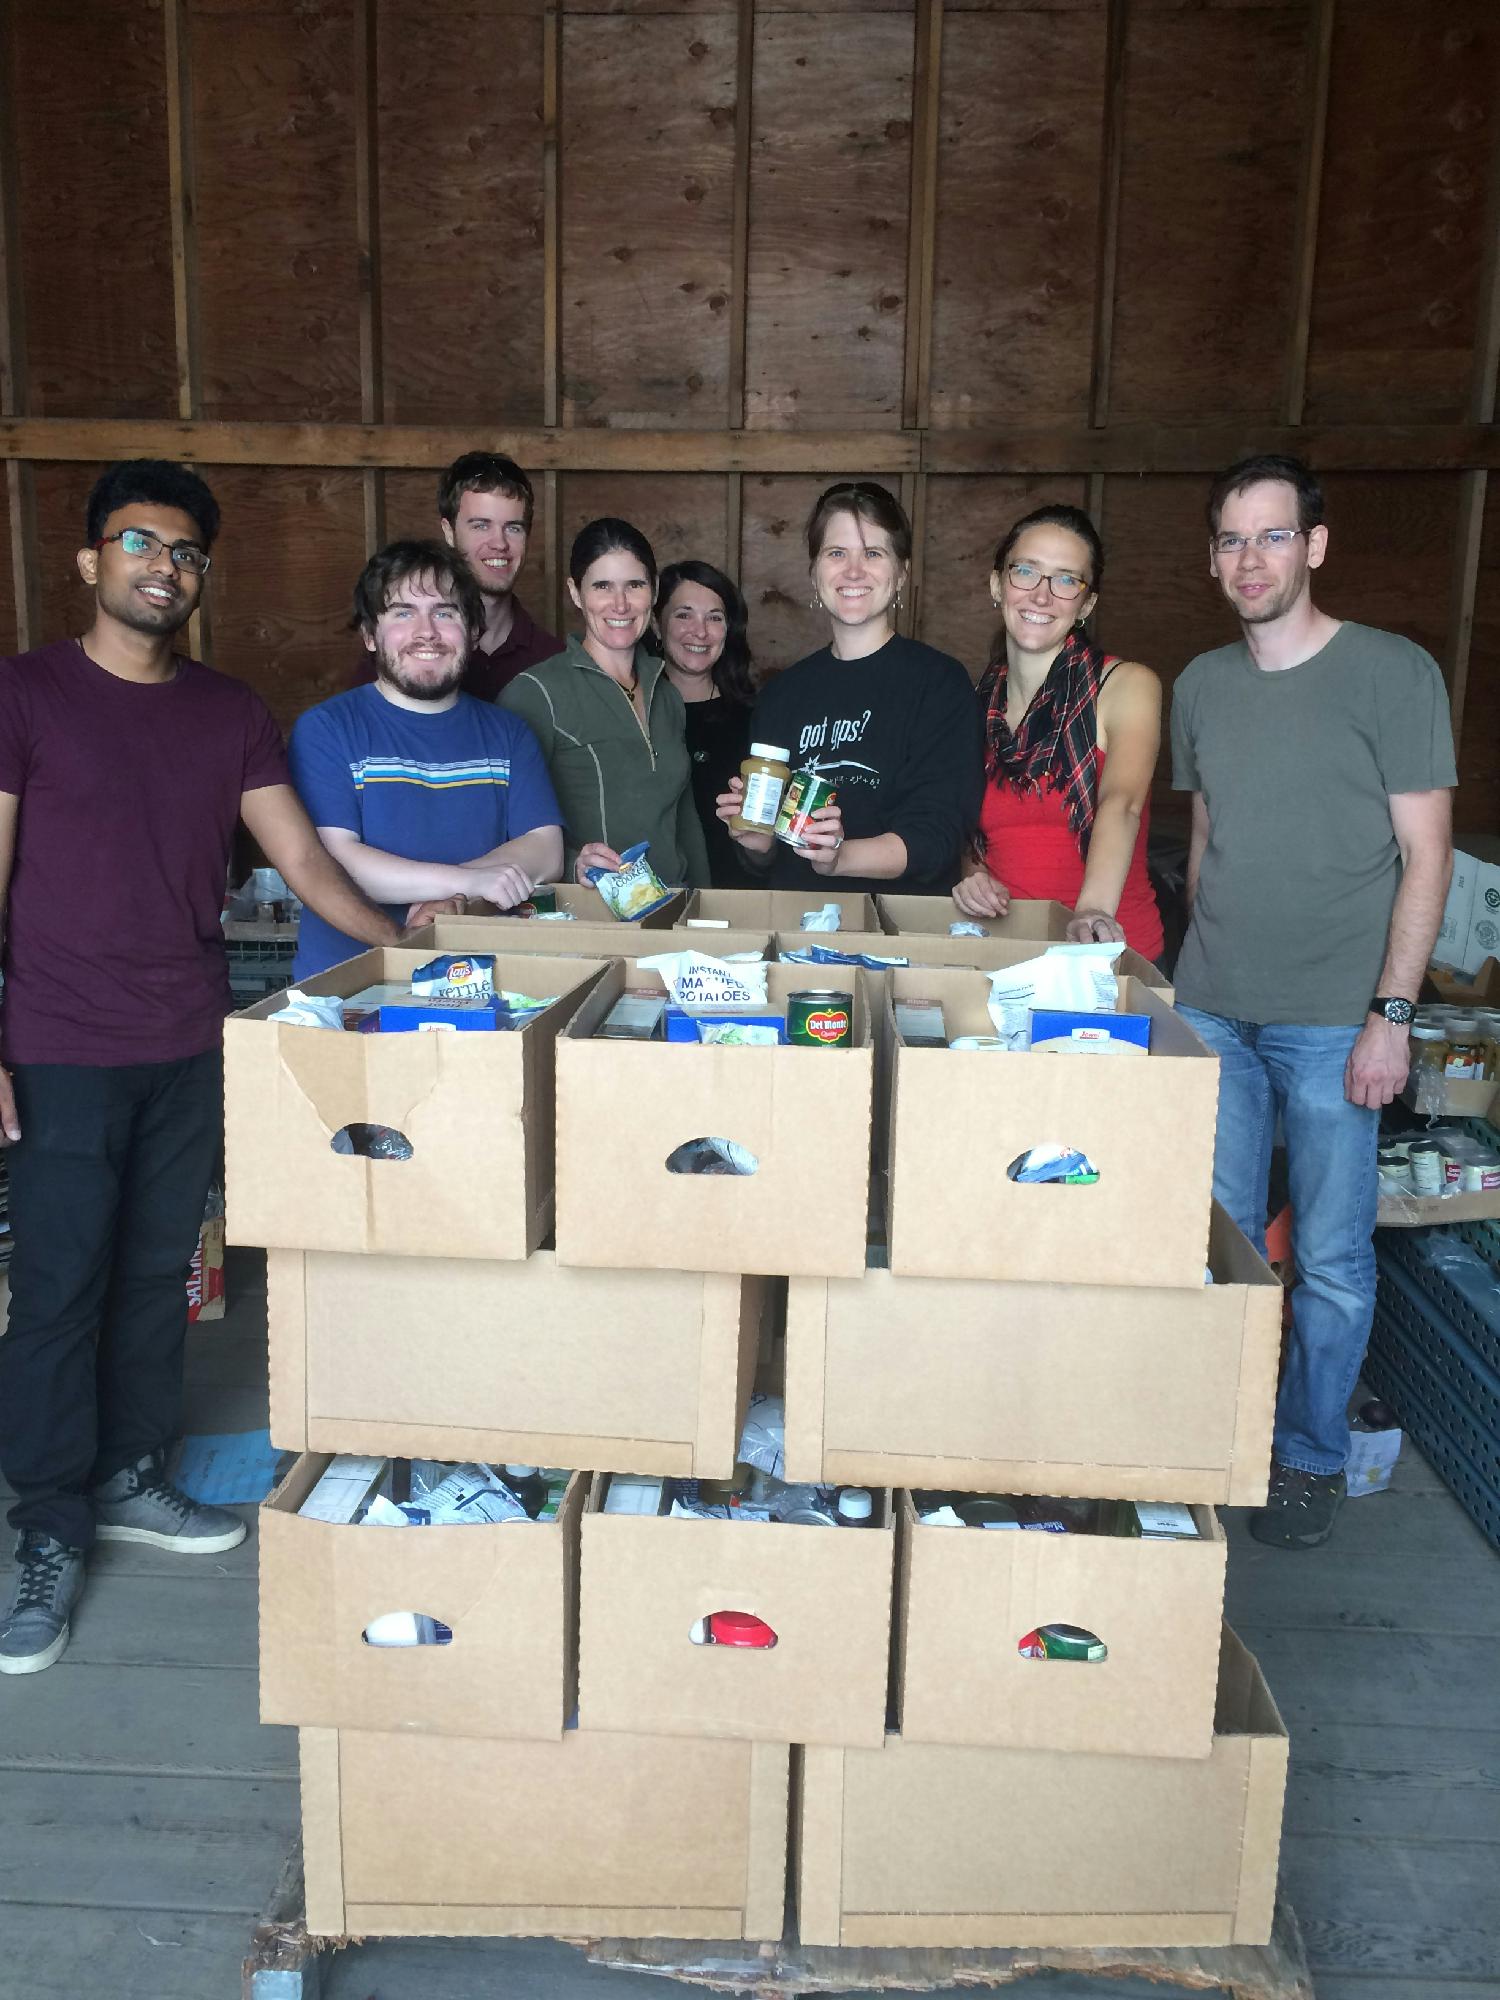 Seeq employees build boxes at the community food bank during an all-team meetup.